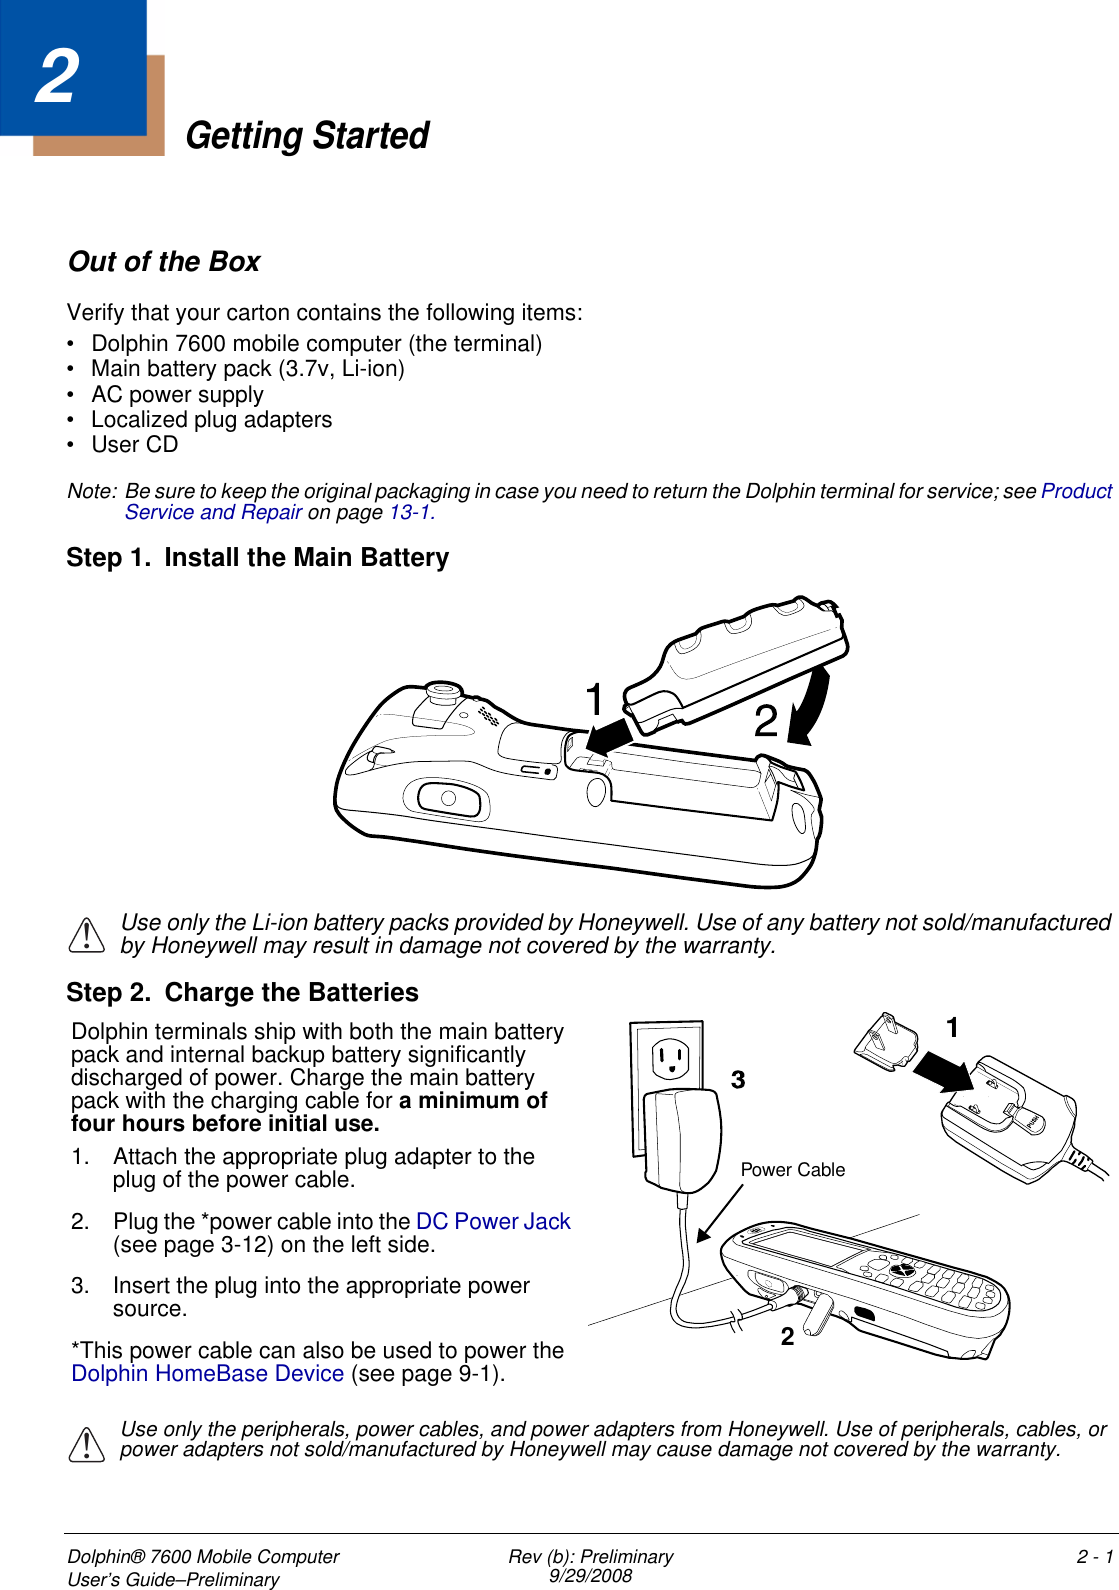 Dolphin® 7600 Mobile Computer User’s Guide–Preliminary Rev (b): Preliminary9/29/2008 2 - 12Getting StartedOut of the BoxVerify that your carton contains the following items: • Dolphin 7600 mobile computer (the terminal)• Main battery pack (3.7v, Li-ion)• AC power supply• Localized plug adapters •User CDNote: Be sure to keep the original packaging in case you need to return the Dolphin terminal for service; see Product Service and Repair on page 13-1. Step 1. Install the Main Battery    Use only the Li-ion battery packs provided by Honeywell. Use of any battery not sold/manufactured by Honeywell may result in damage not covered by the warranty. Step 2. Charge the BatteriesUse only the peripherals, power cables, and power adapters from Honeywell. Use of peripherals, cables, or power adapters not sold/manufactured by Honeywell may cause damage not covered by the warranty.!21Dolphin terminals ship with both the main battery pack and internal backup battery significantly discharged of power. Charge the main battery pack with the charging cable for a minimum of four hours before initial use.1. Attach the appropriate plug adapter to the plug of the power cable.2. Plug the *power cable into the DC Power Jack (see page 3-12) on the left side. 3. Insert the plug into the appropriate power source. *This power cable can also be used to power the Dolphin HomeBase Device (see page 9-1).Power Cable!